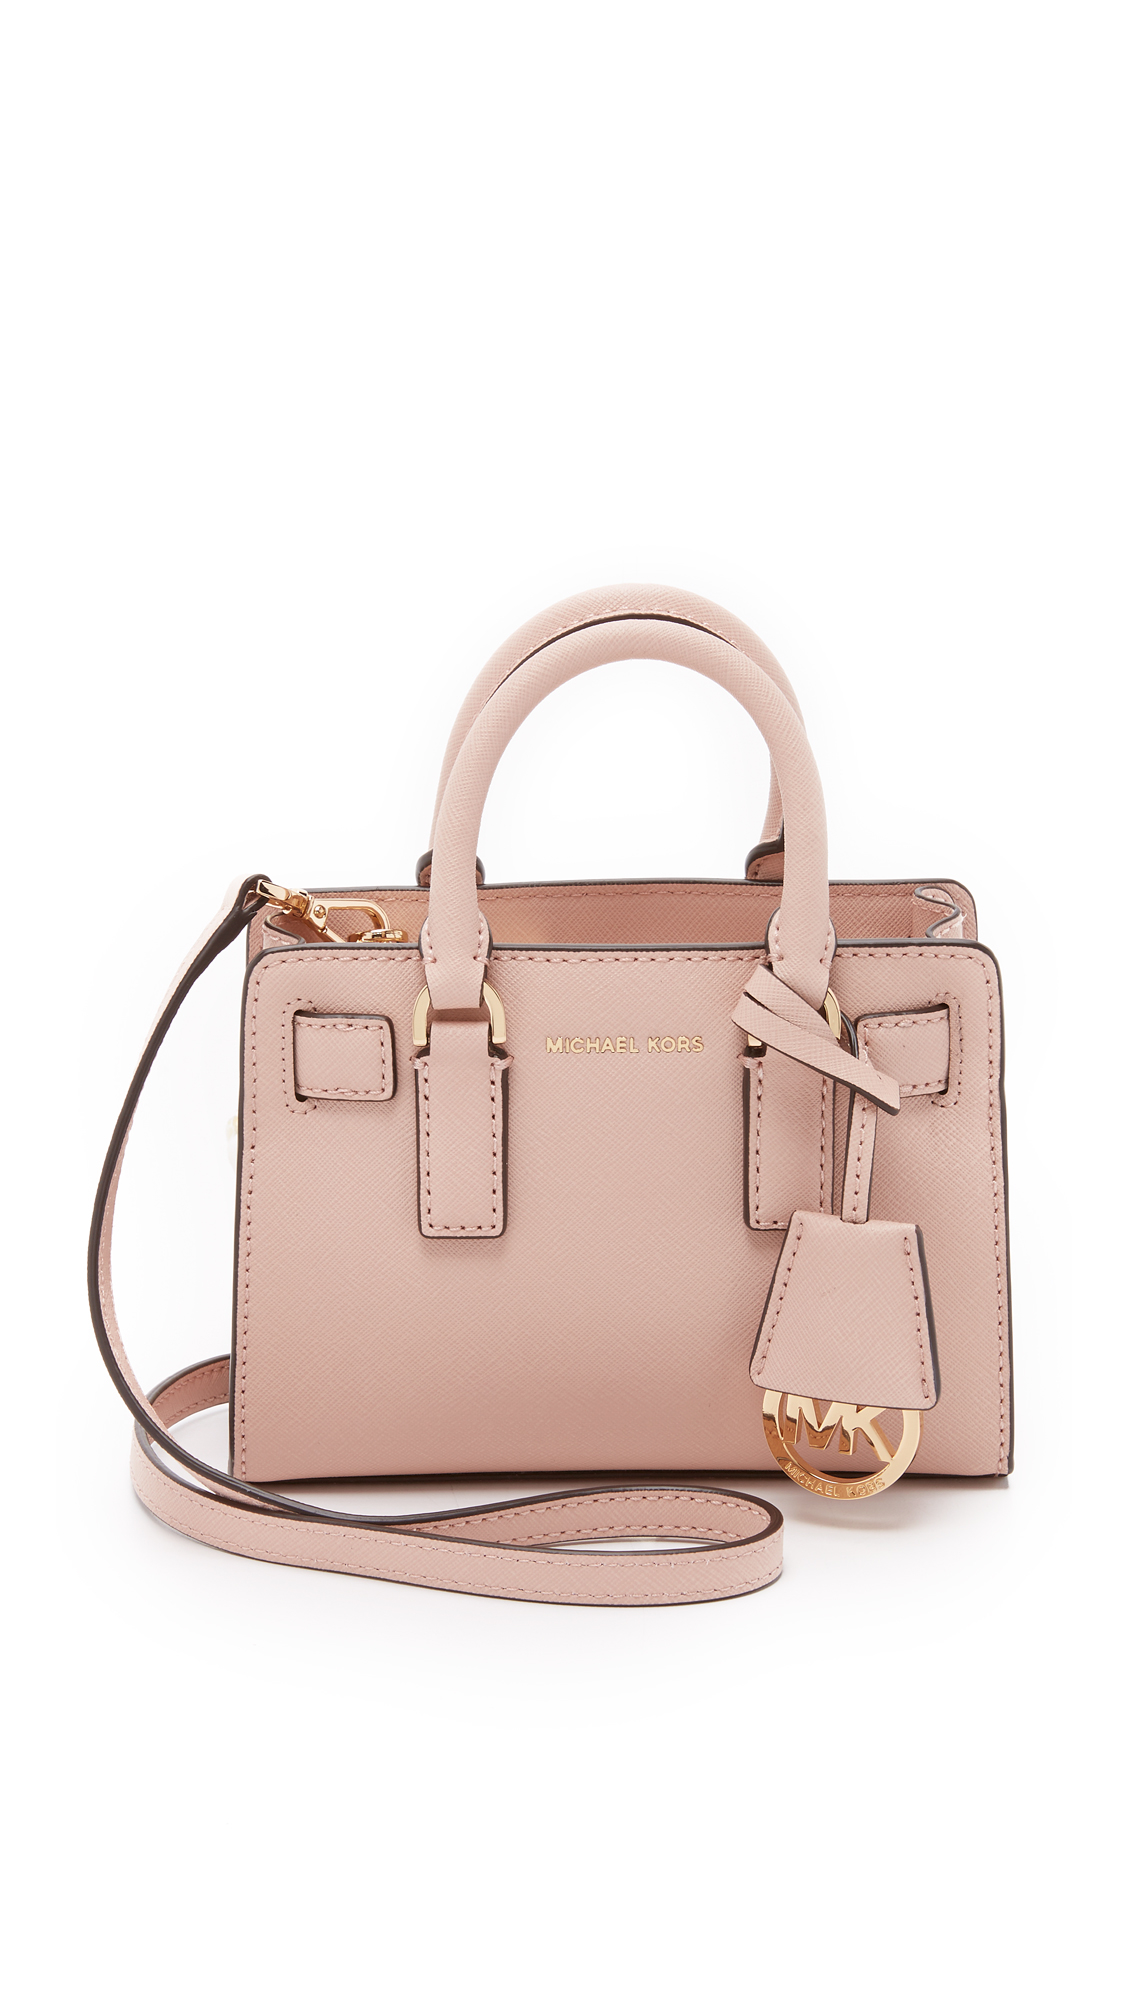 MICHAEL Michael Kors Dillon Saffiano-Leather Cross-Body Bag in Pink | Lyst